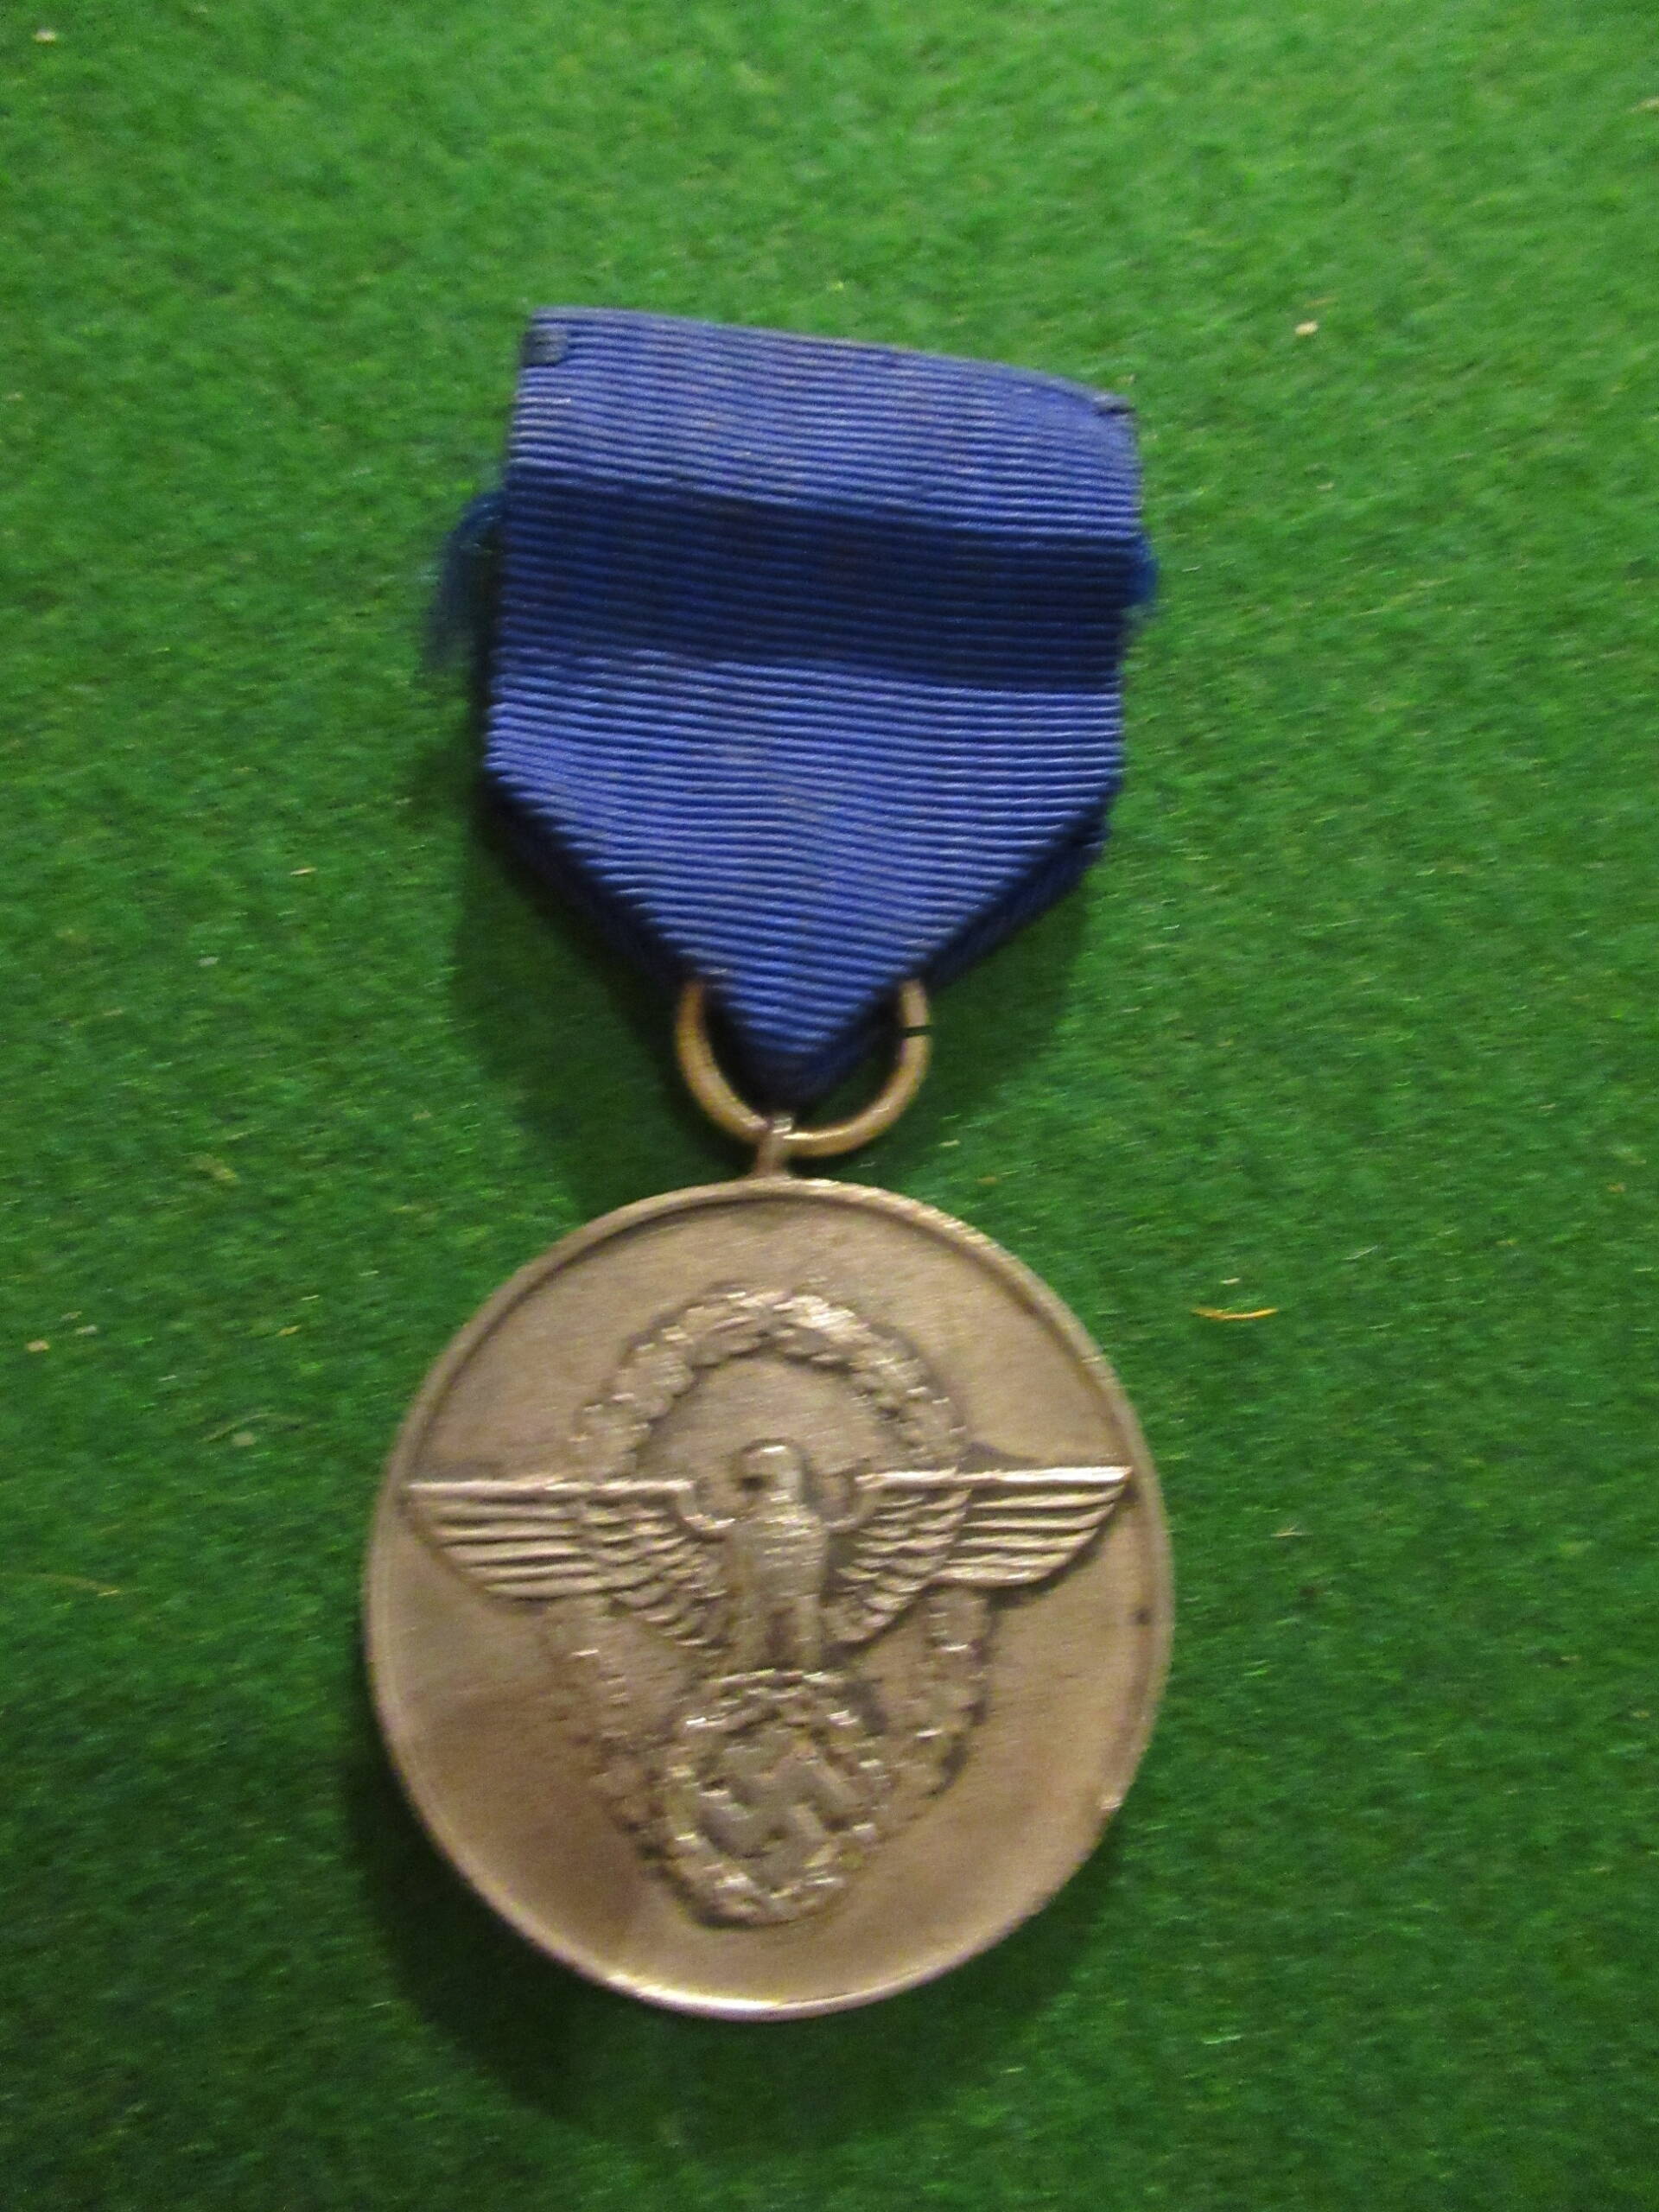 Police 8 years service medal